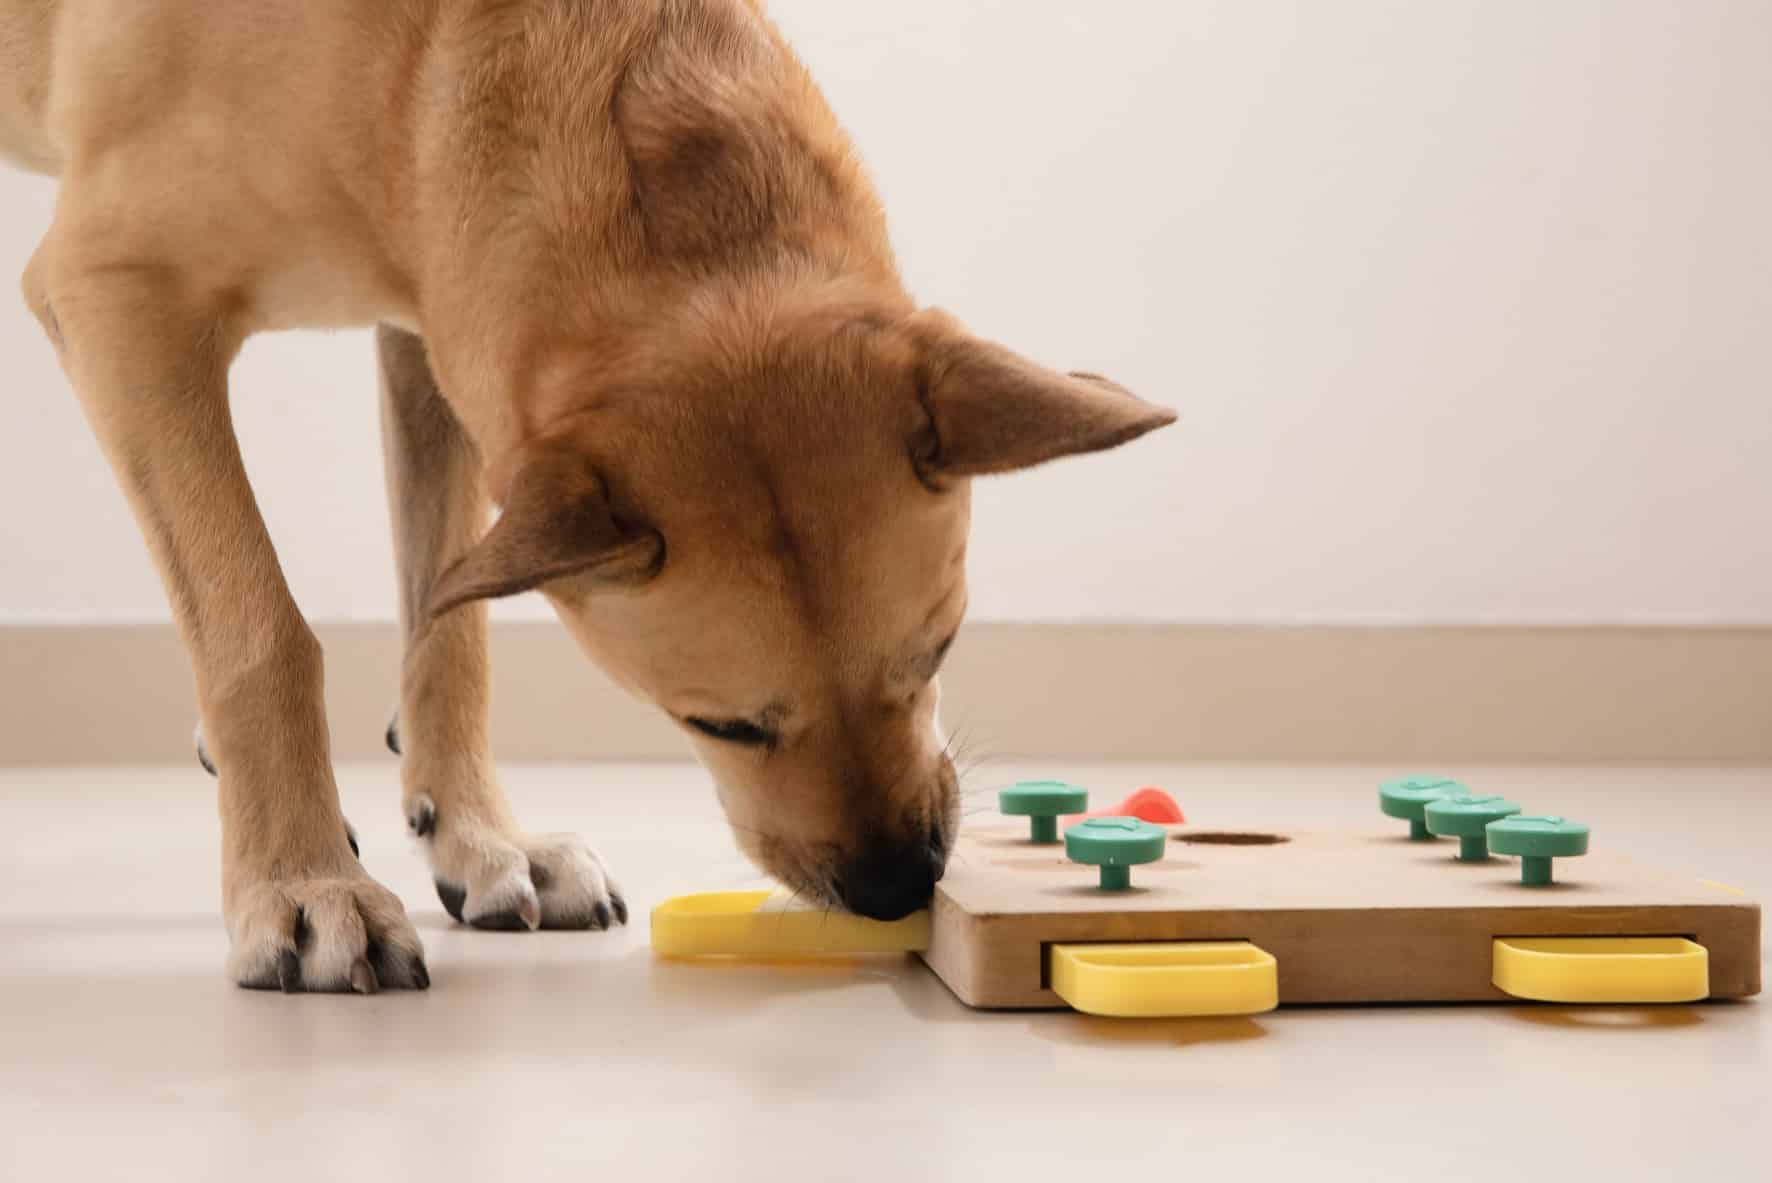 Dog Toys: How to Pick the Best and Safest